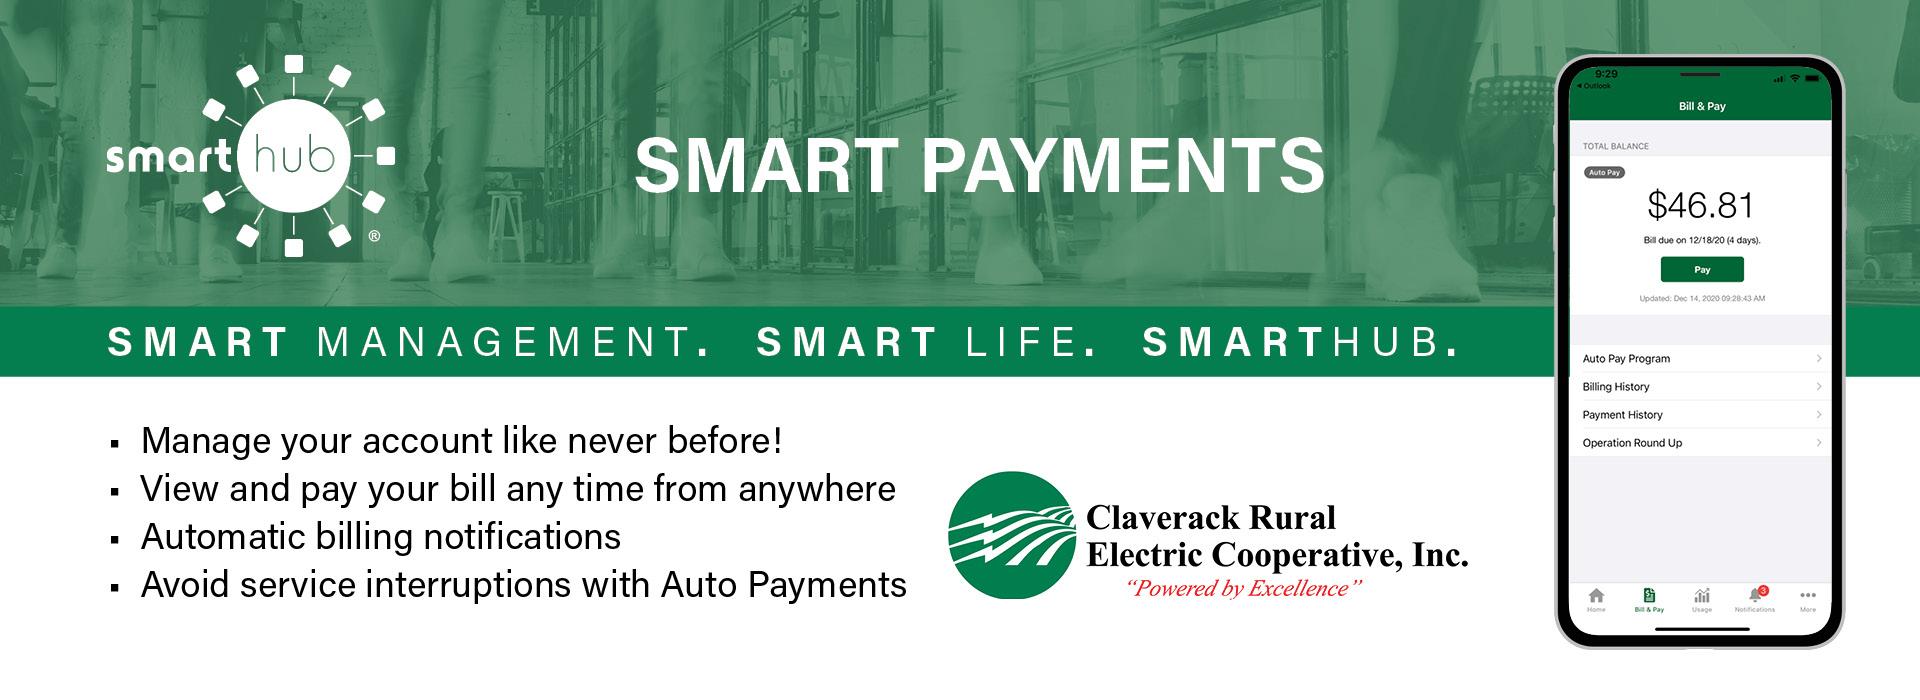 Smart Payments